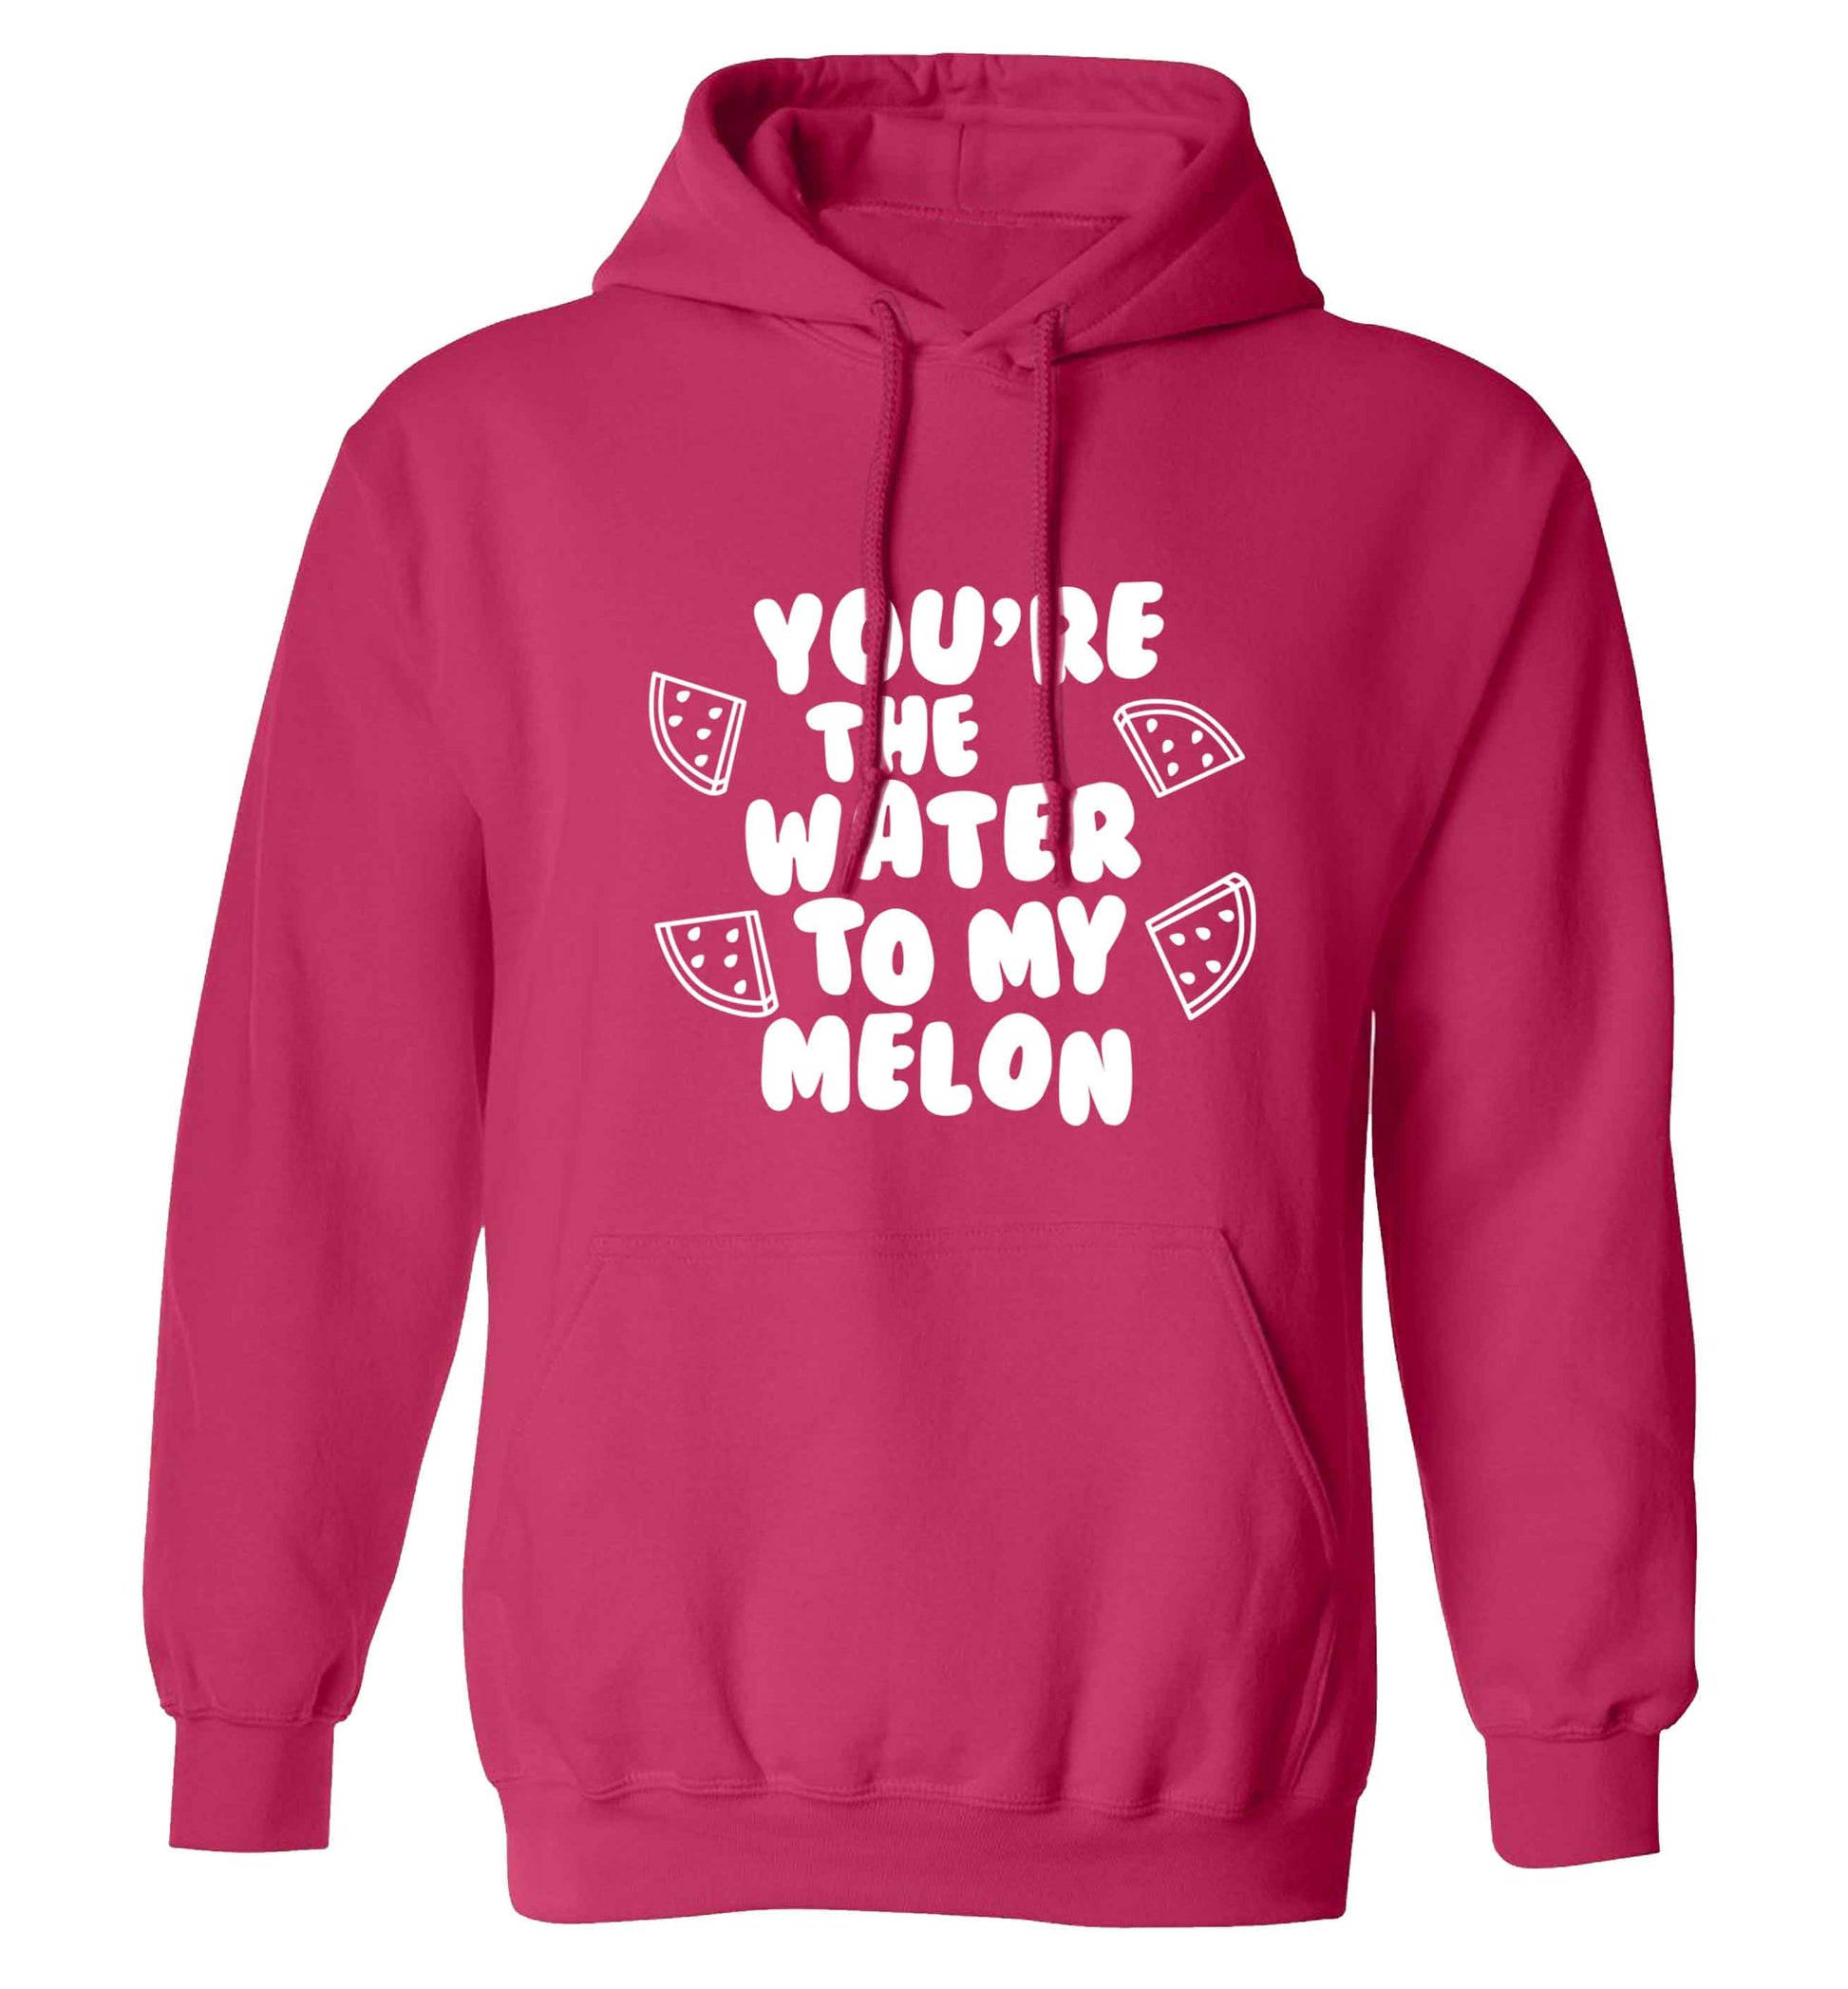 You're the water to my melon adults unisex pink hoodie 2XL